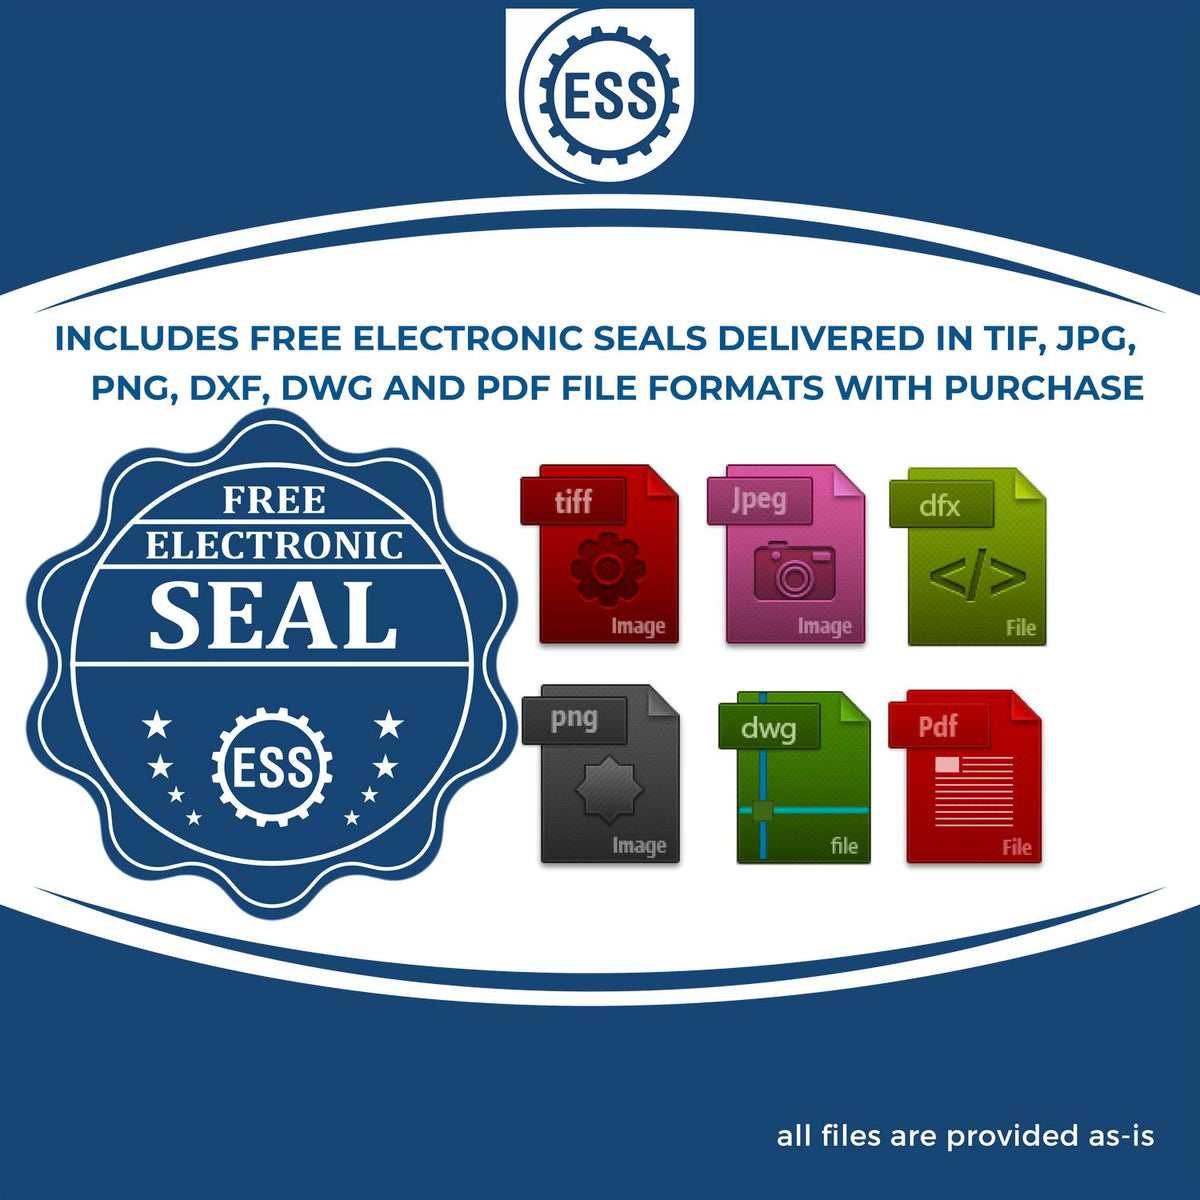 An infographic for the free electronic seal for the Ohio Professional Geologist Seal Stamp illustrating the different file type icons such as DXF, DWG, TIF, JPG and PNG.